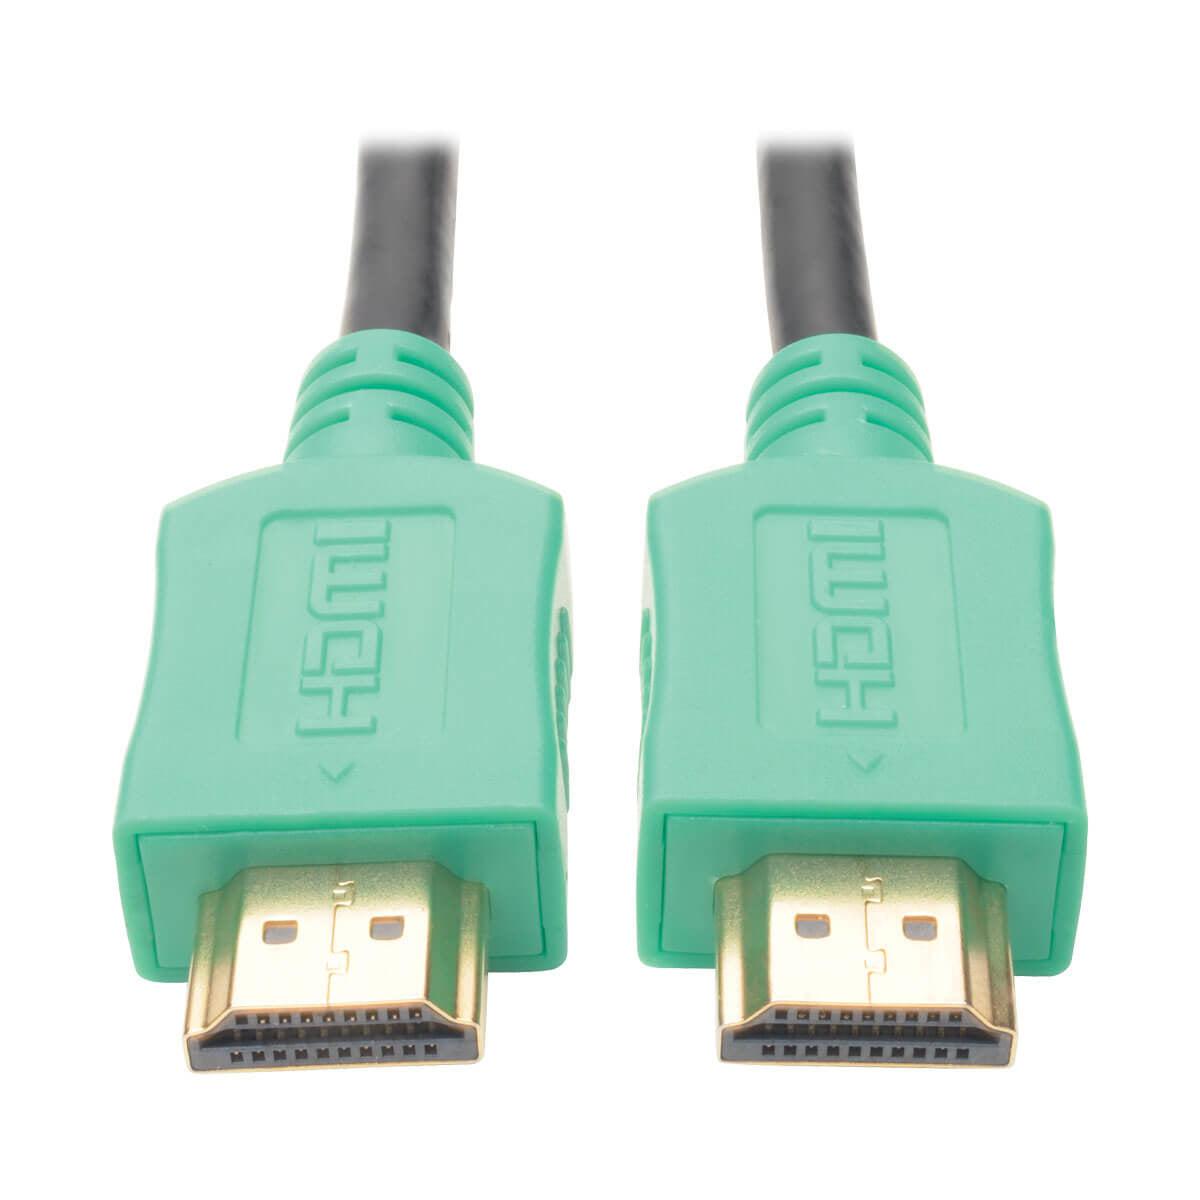 Tripp Lite P568-010-Gn High-Speed Hdmi Cable, Digital Video With Audio, Uhd 4K (M/M), Green, 10 Ft. (3.05 M)